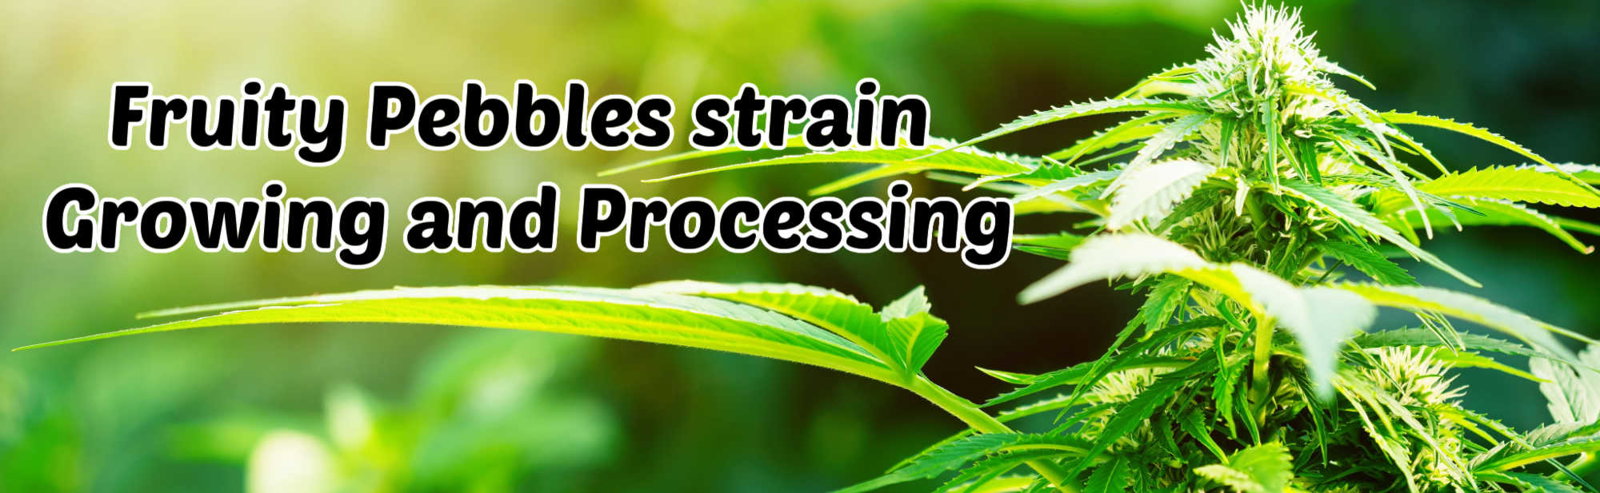 image of growing and processing of fruity pebbles strain